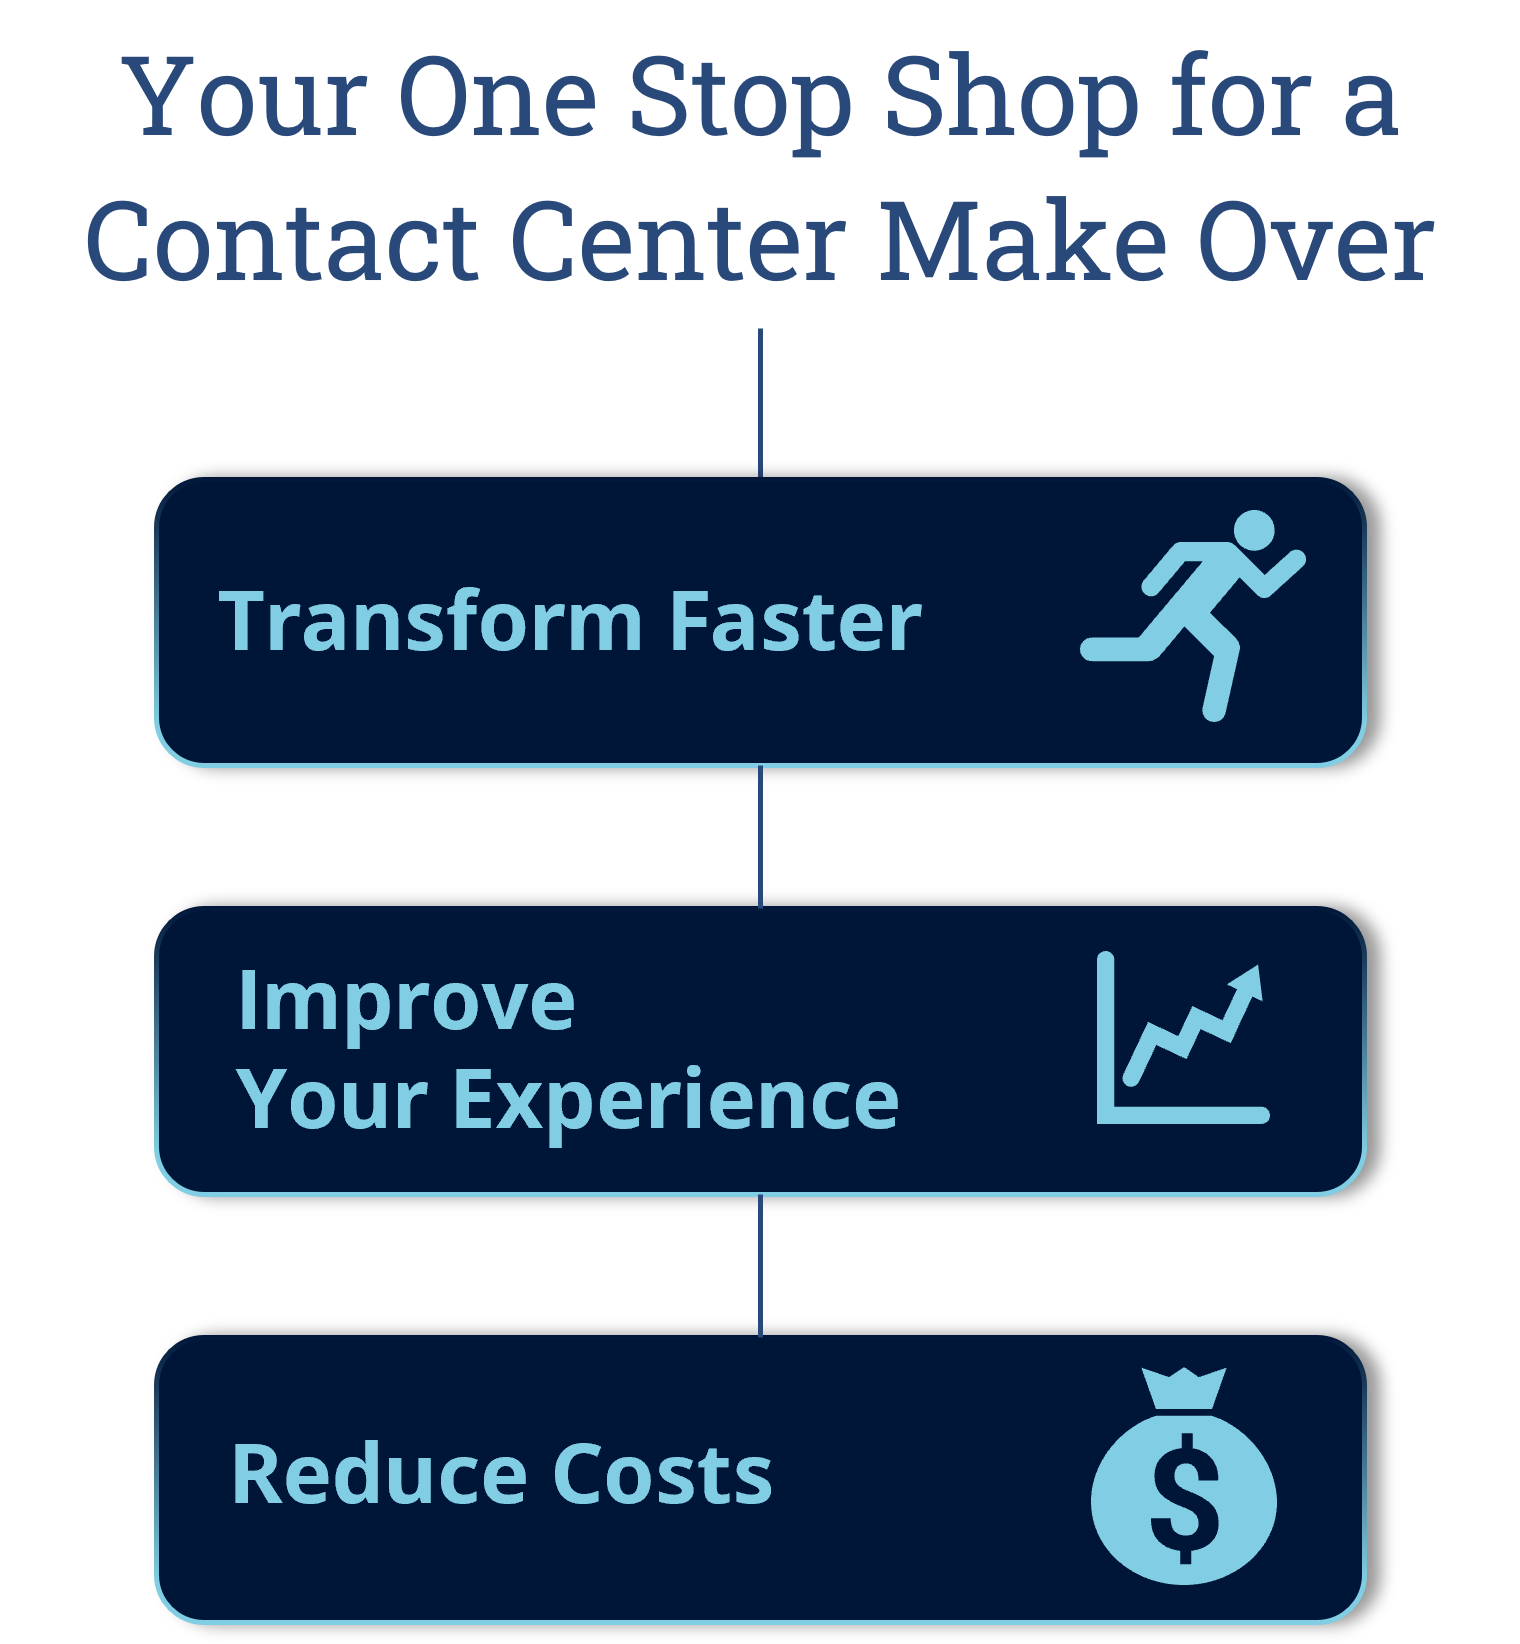 your one stop shop for contact center transformation